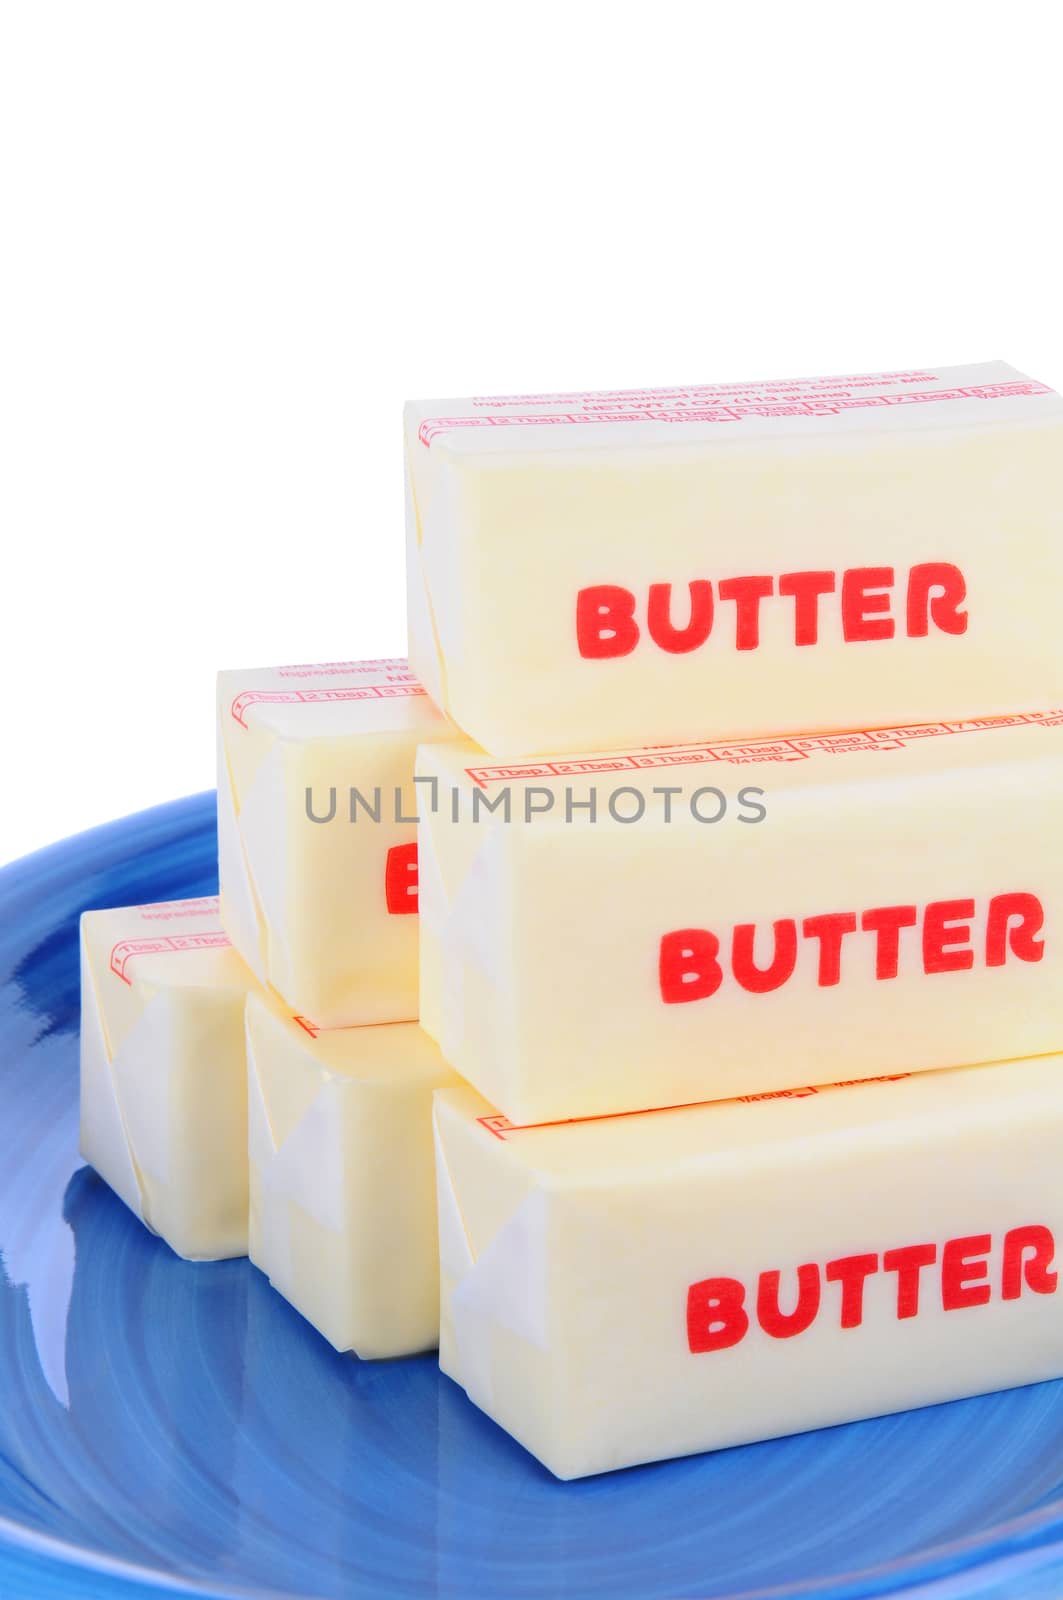 Closeup of sticks of wrapped butter on a blue plate. Vertical format over a white background.